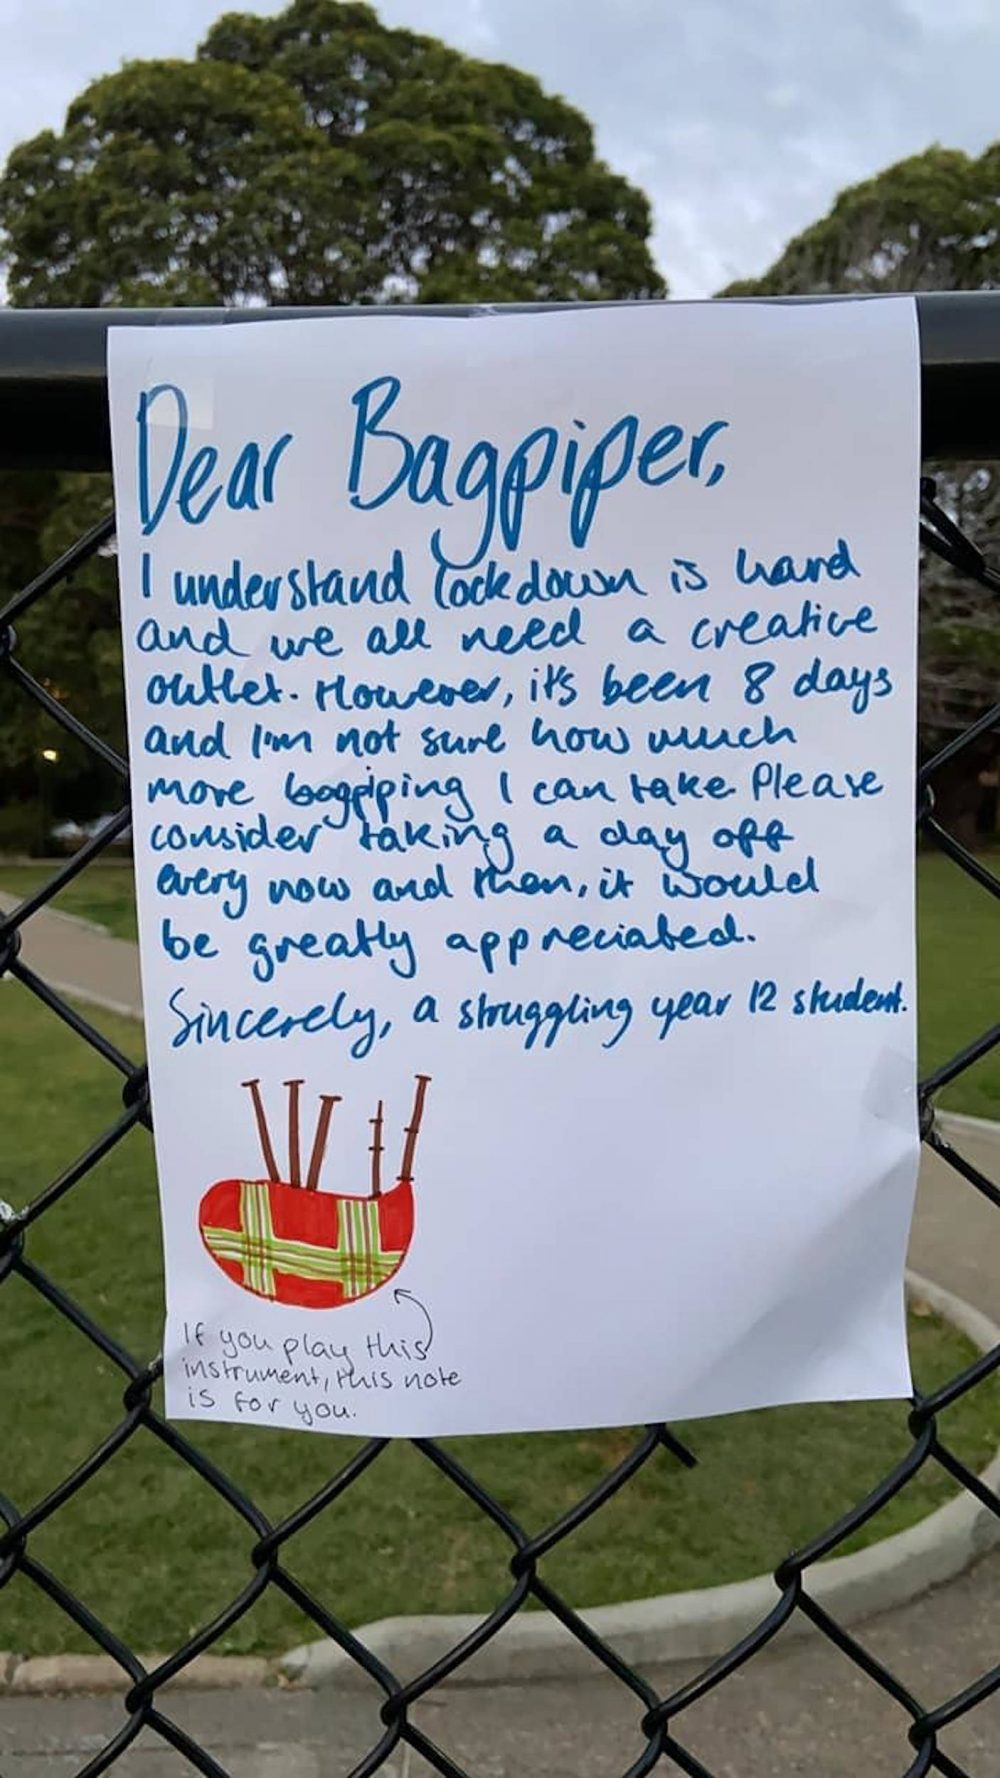 The note begging the bagpiper to stop | Scottish Music News